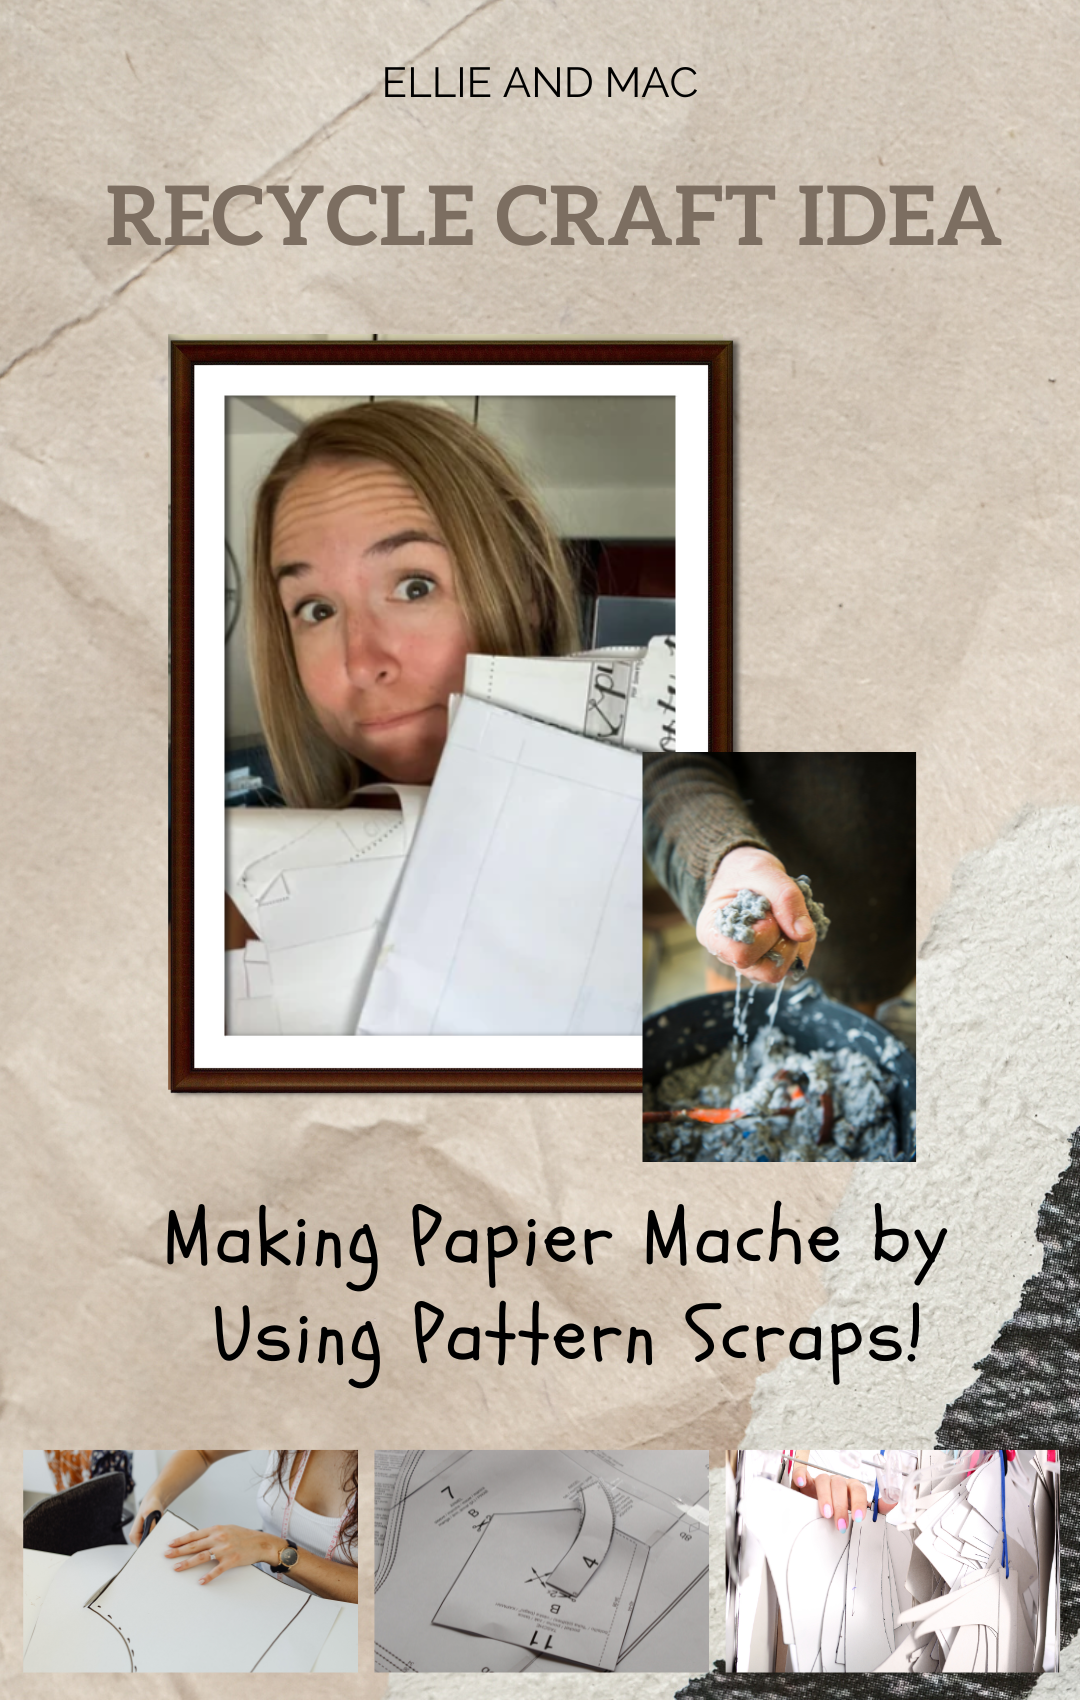 Recycle Craft Idea: Making Papier Mache by Using Pattern Scraps!